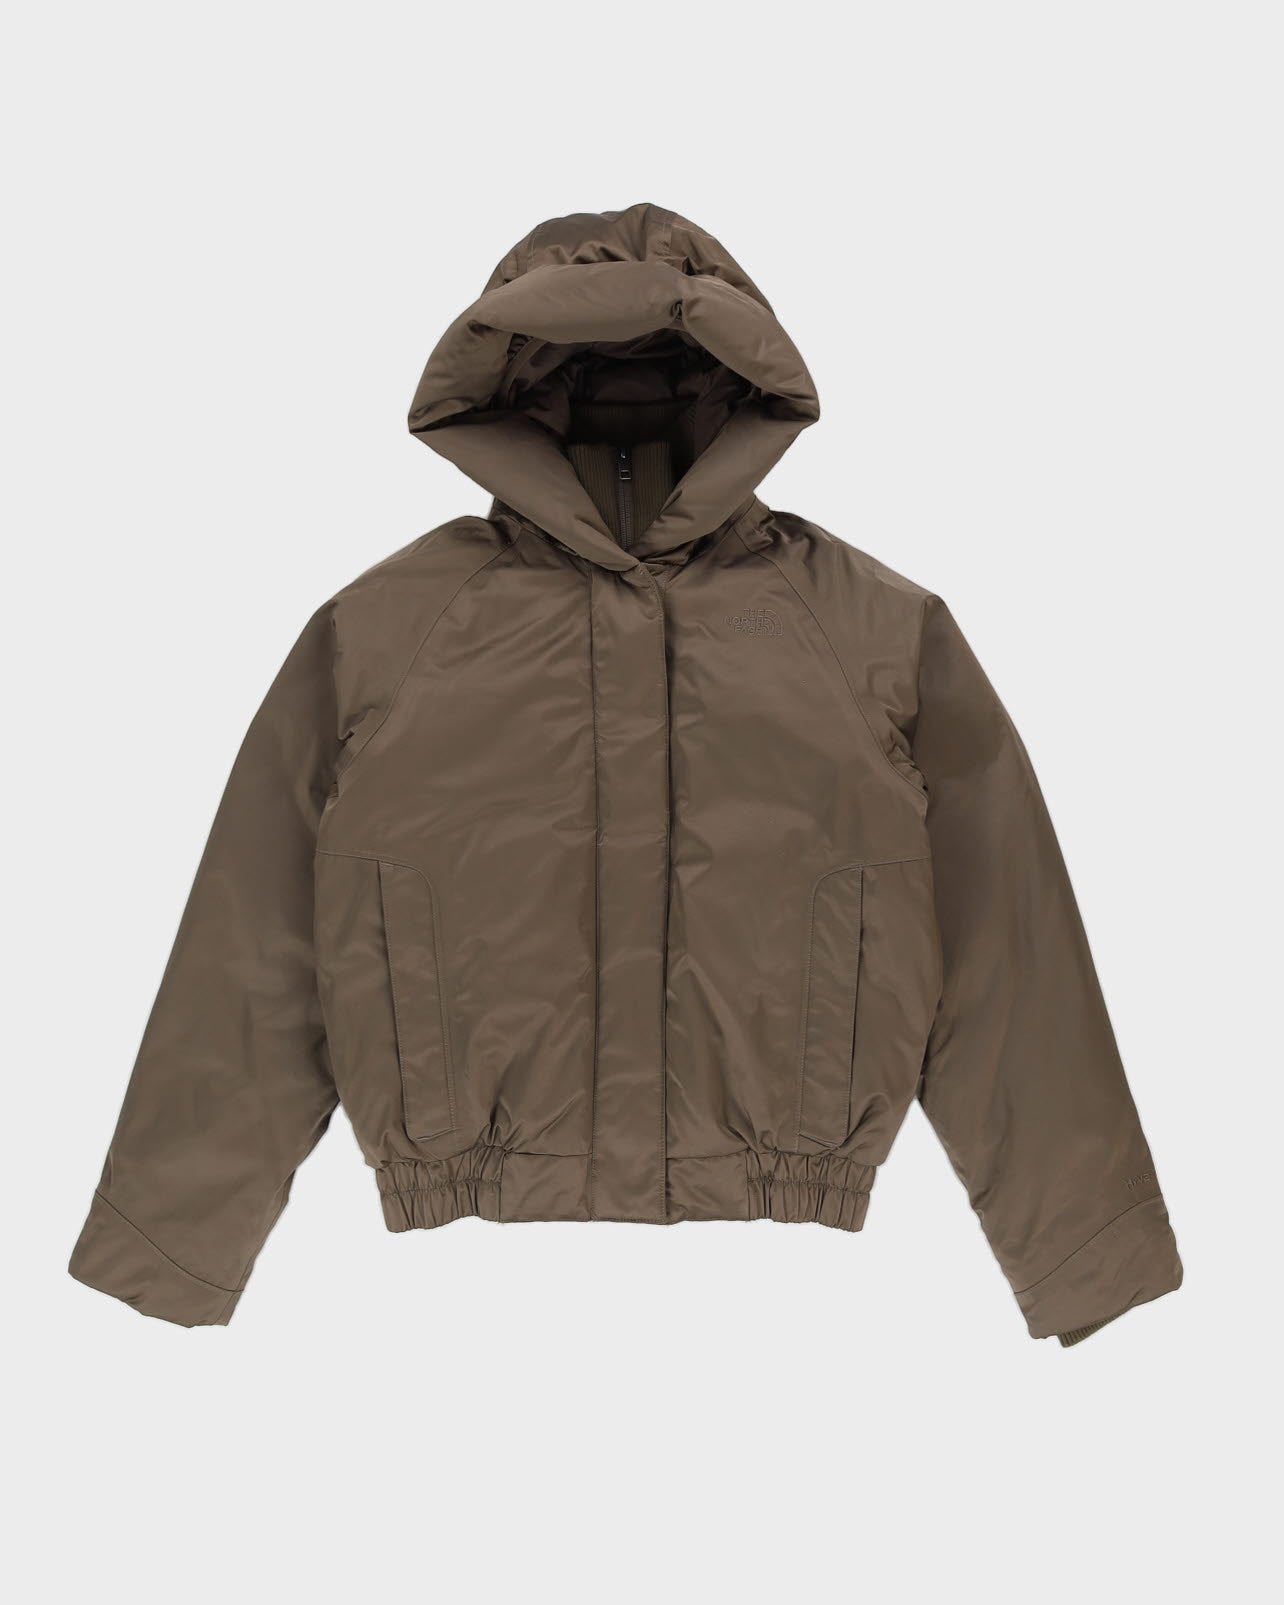 The North Face HyVent Brown Bomber Jacket - S